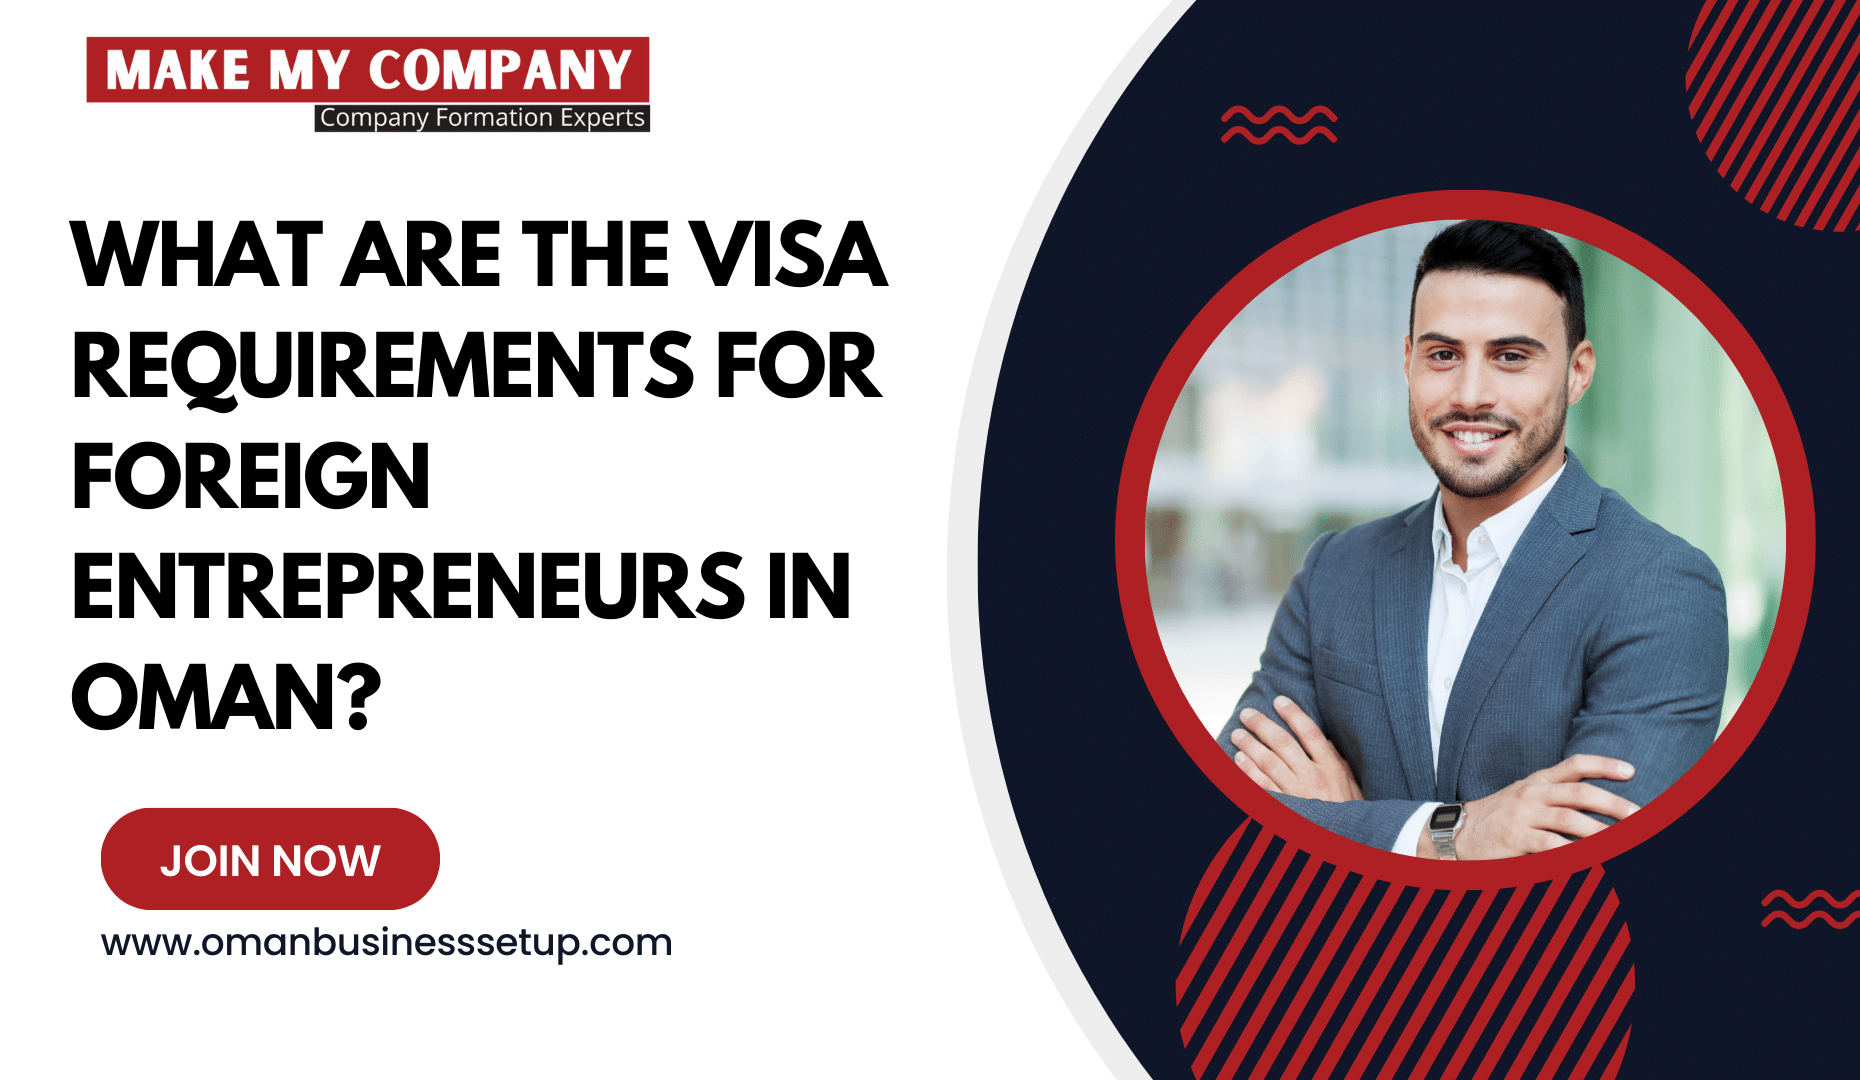 Visa Requirements for Foreign Entrepreneurs in Oman